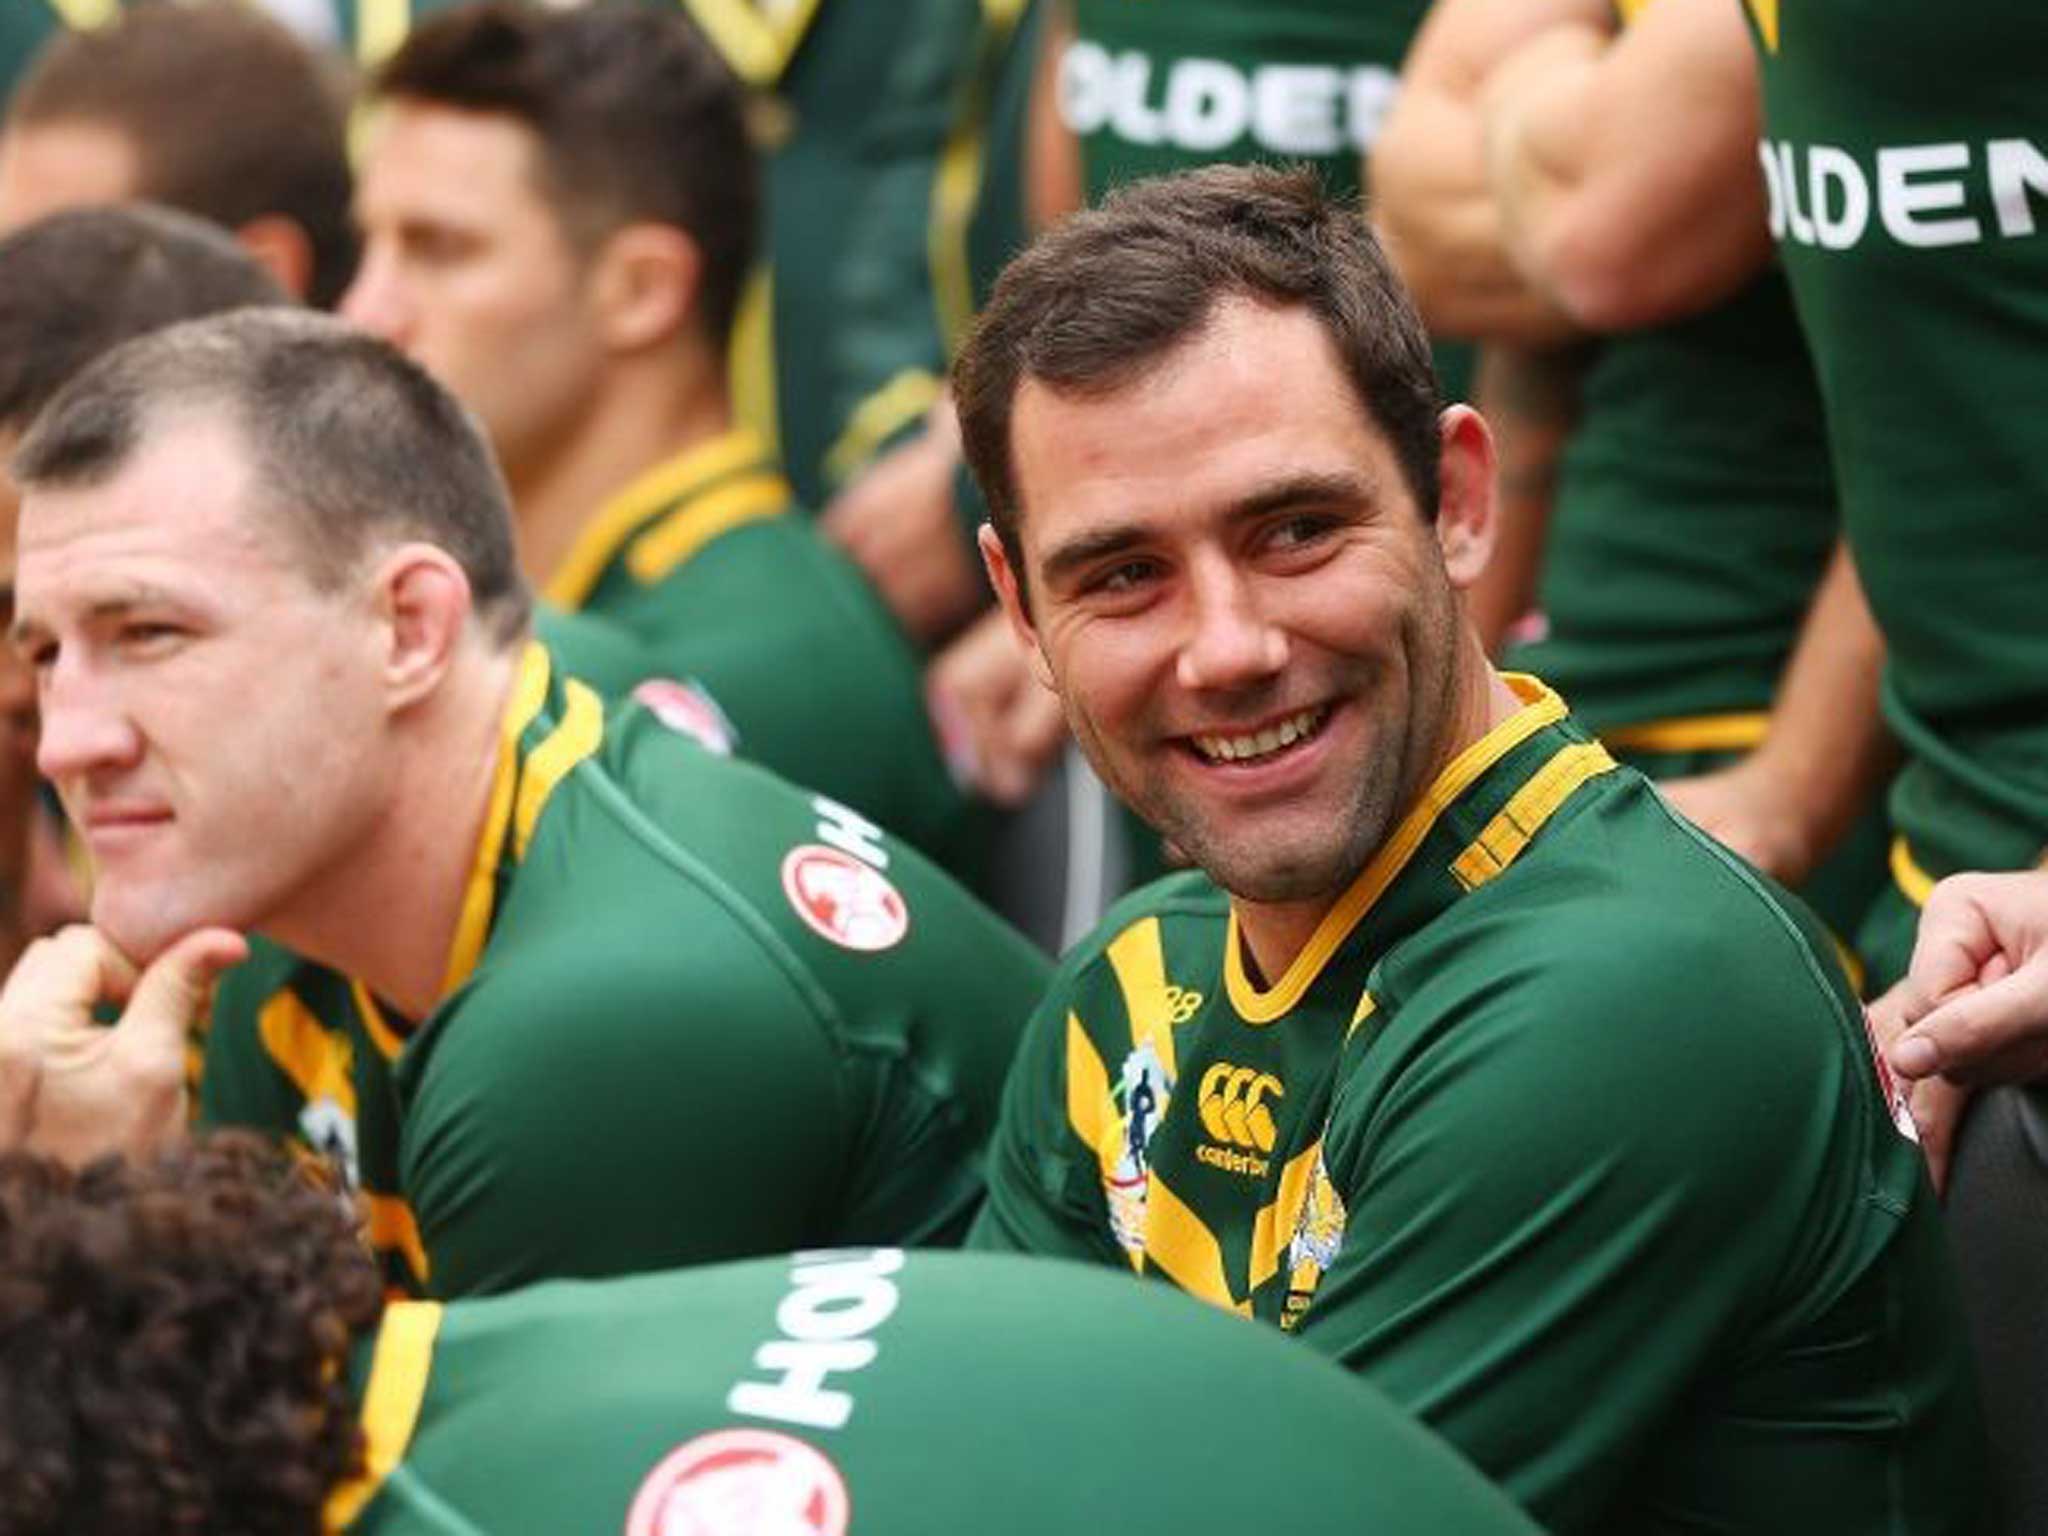 As player of the year Cameron Smith has plenty to smile about